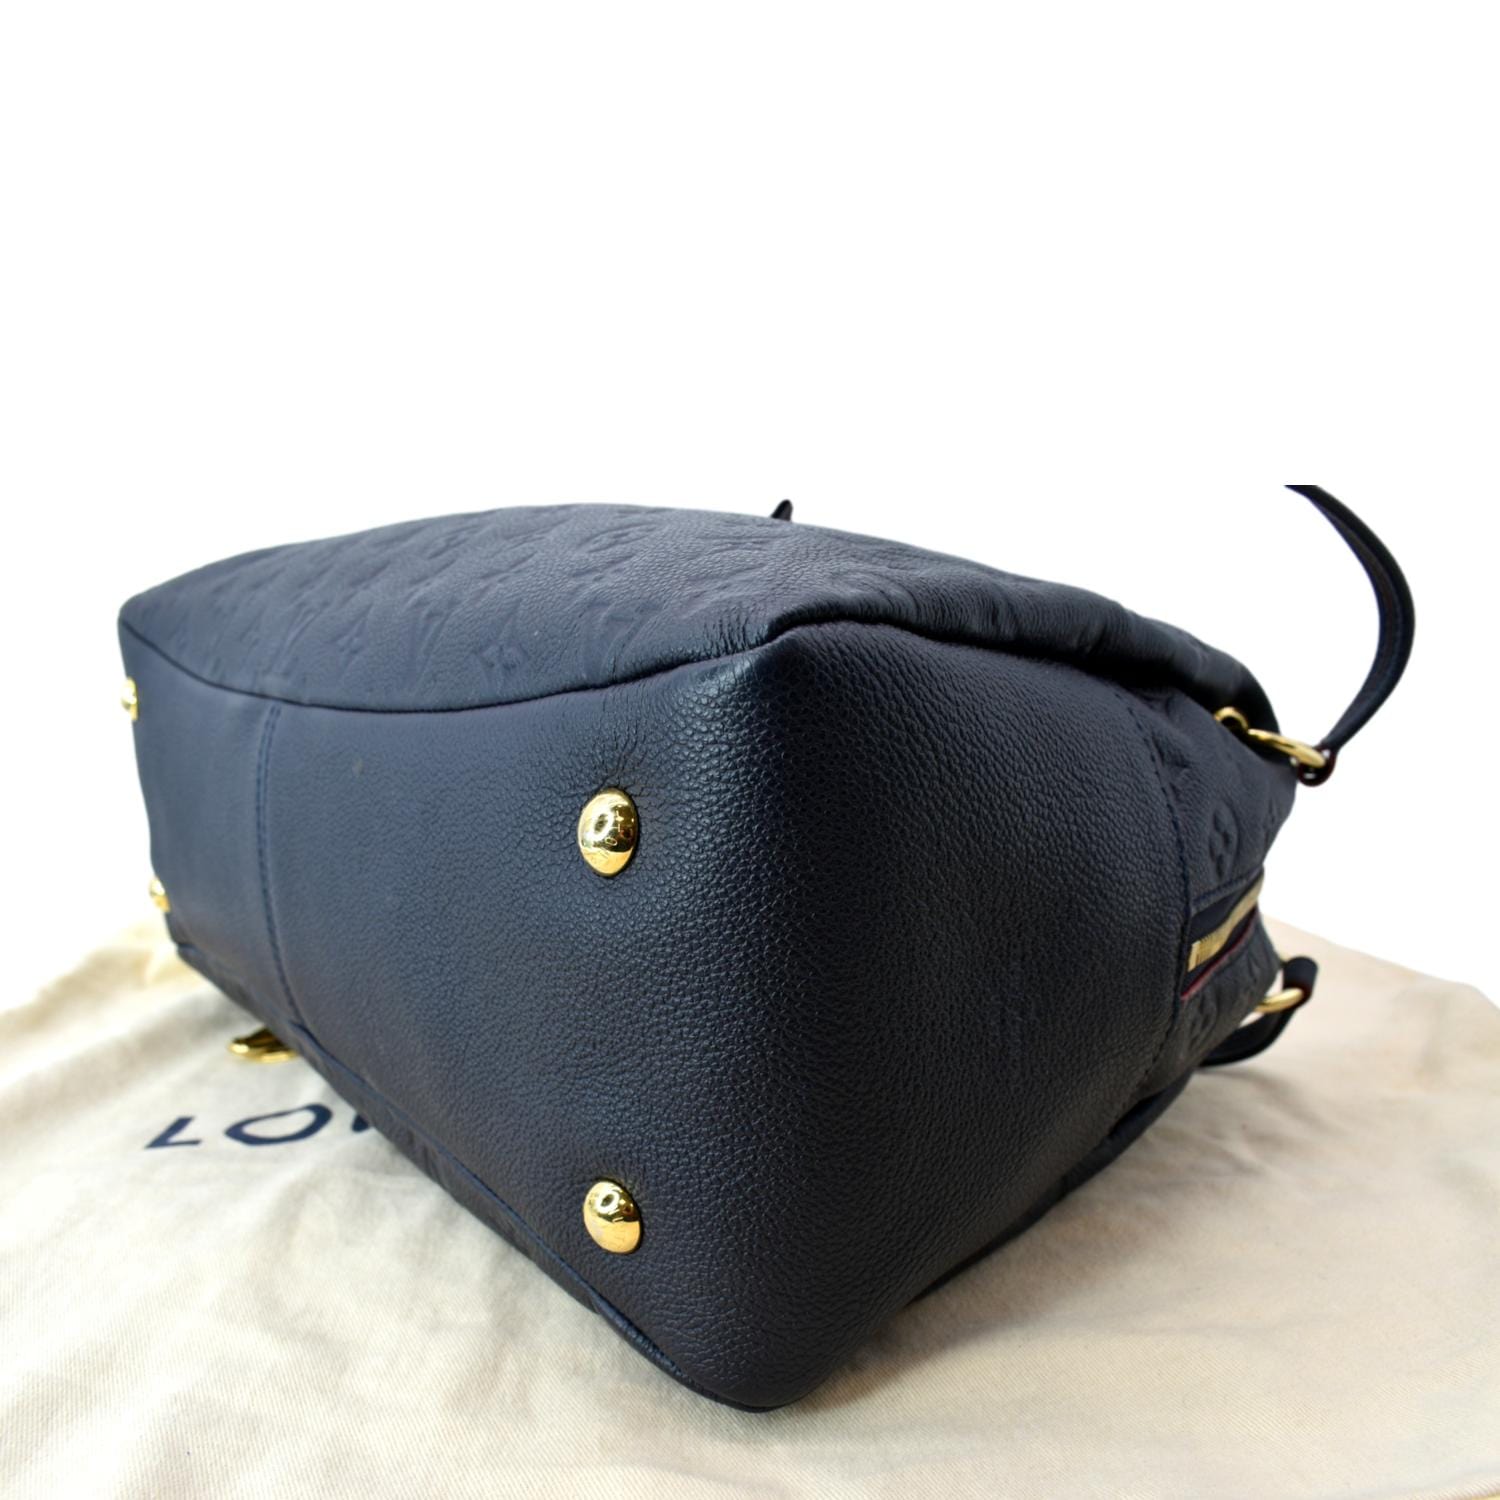 💙LOUIS VUITTON PONT-NEUF EMPREINTE BLUE💙 Excellent to almost new! Made in  Spain on 15th week of 2016 - datecode CA1156. Comes with dustbag,  clochette, 2